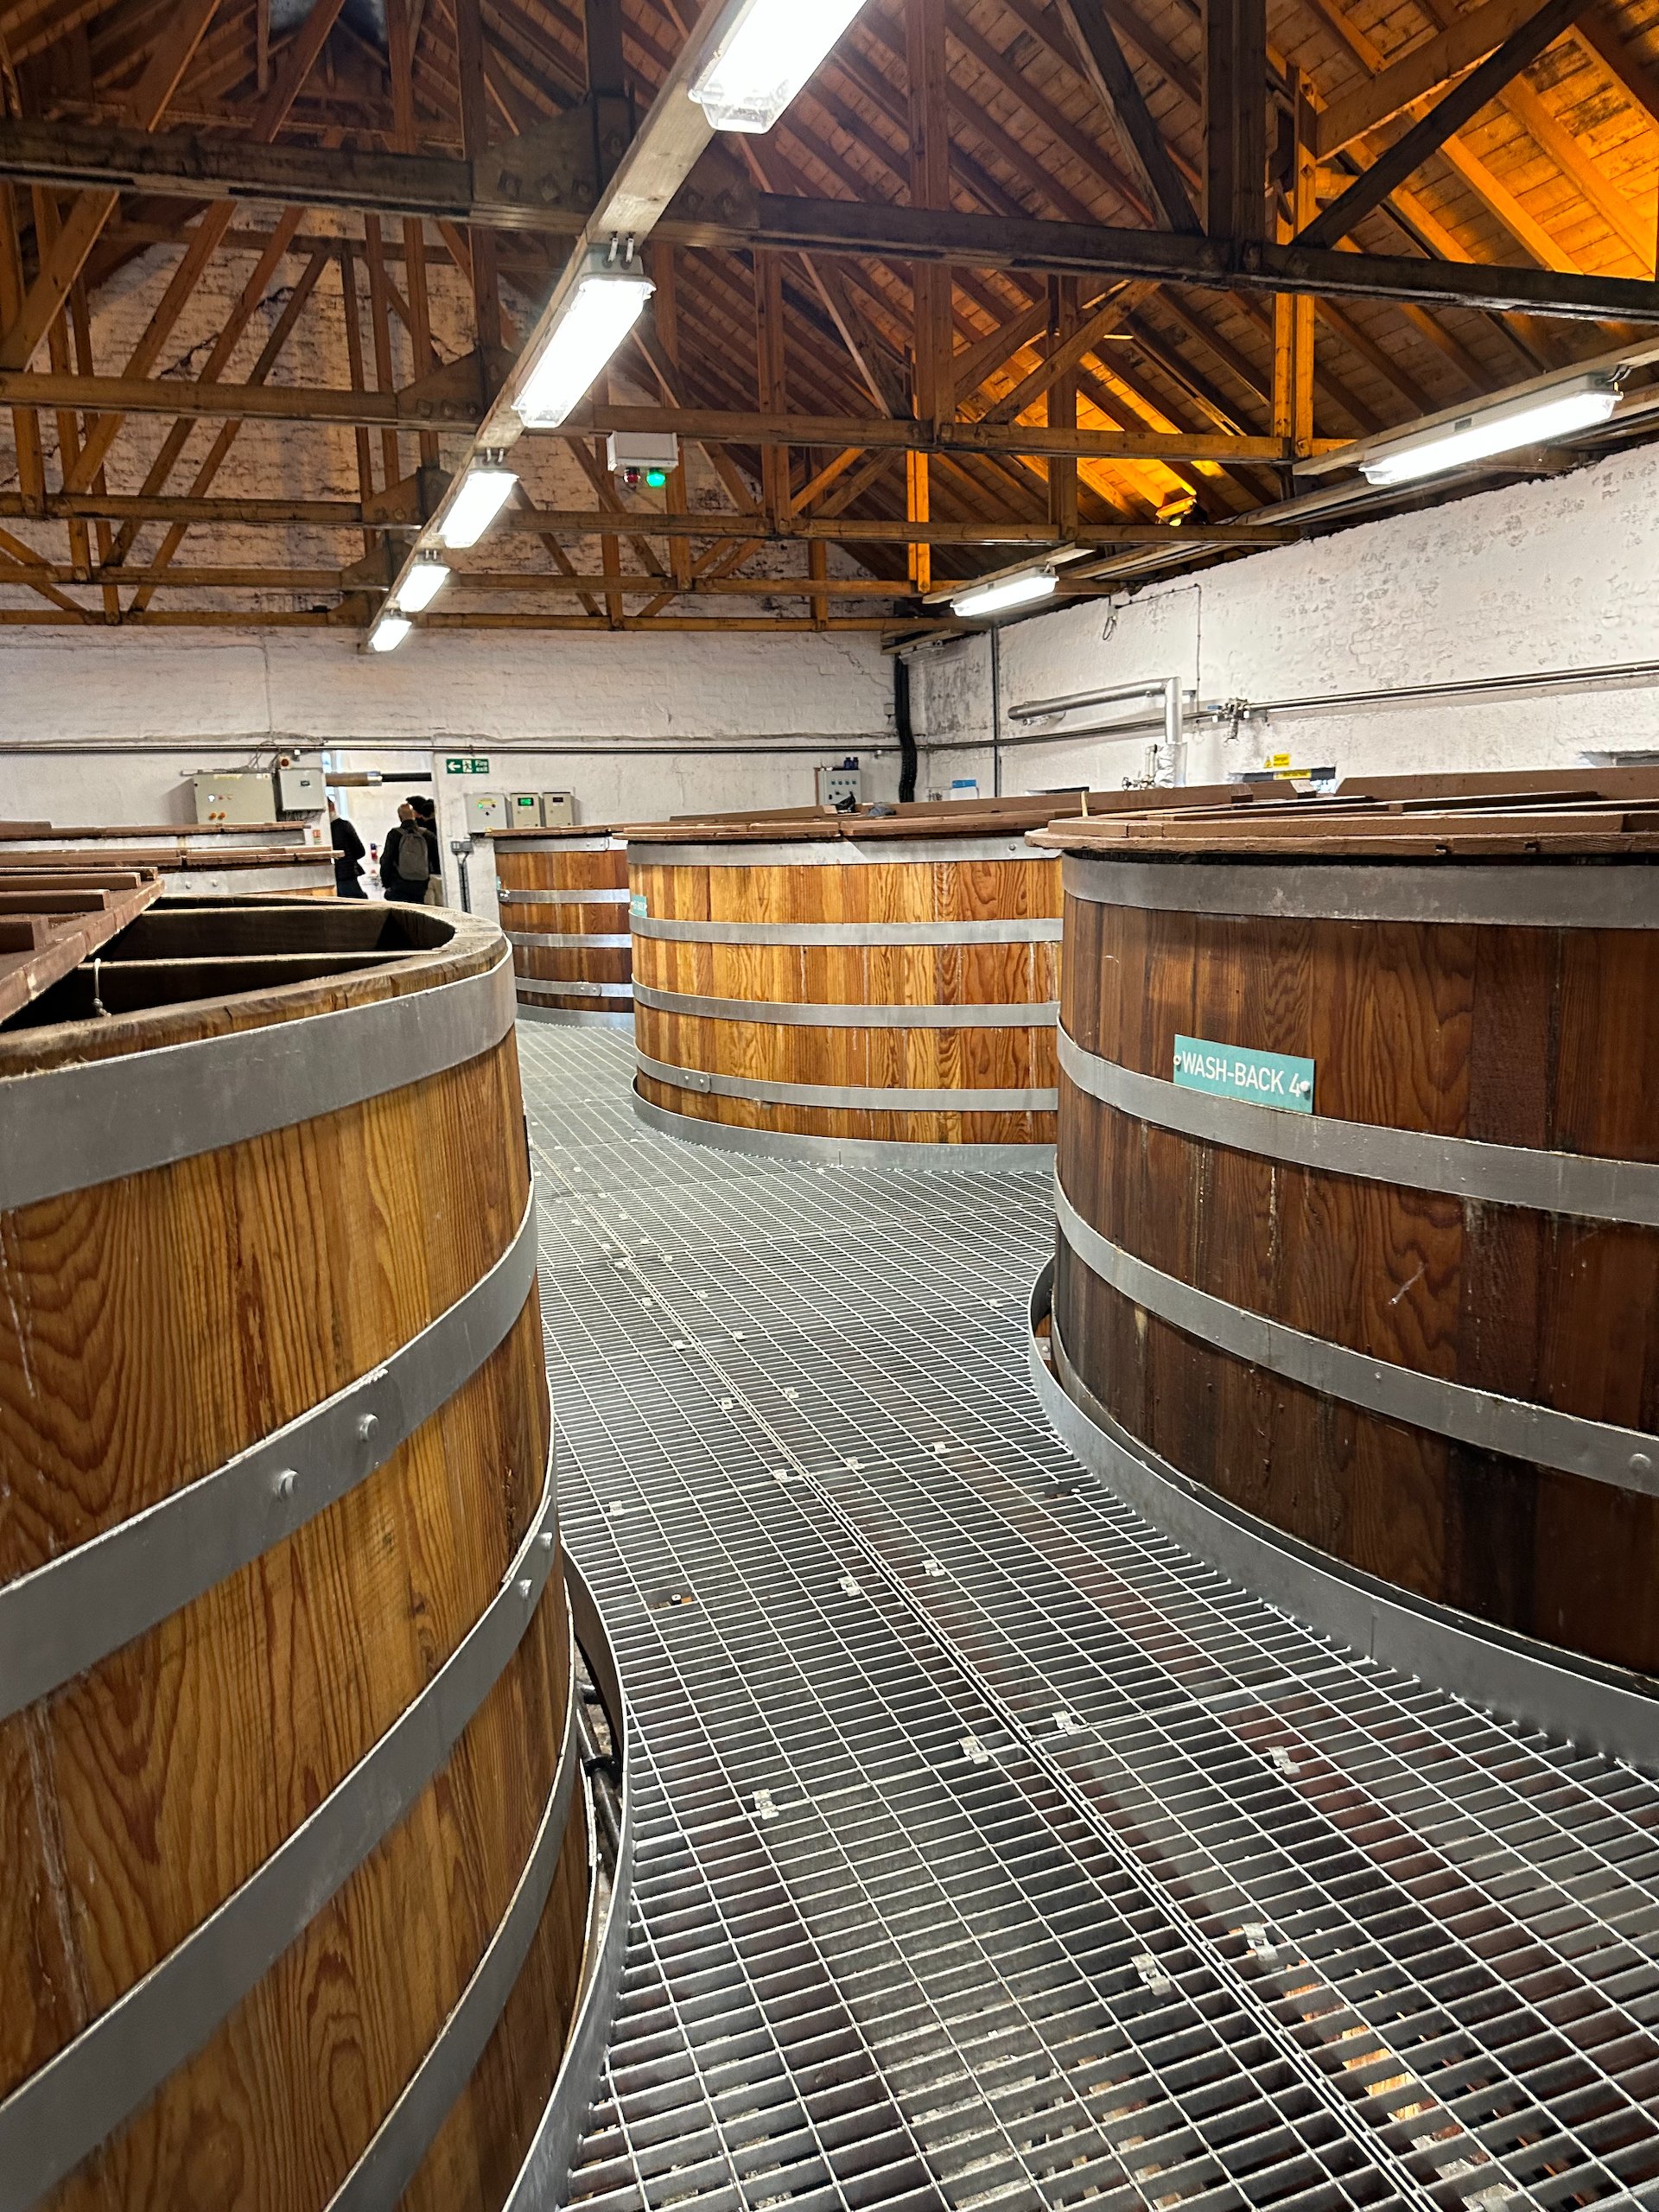  These huge wooden barrels are part of the process, before it goes to much smaller barrels for the long-term aging.  